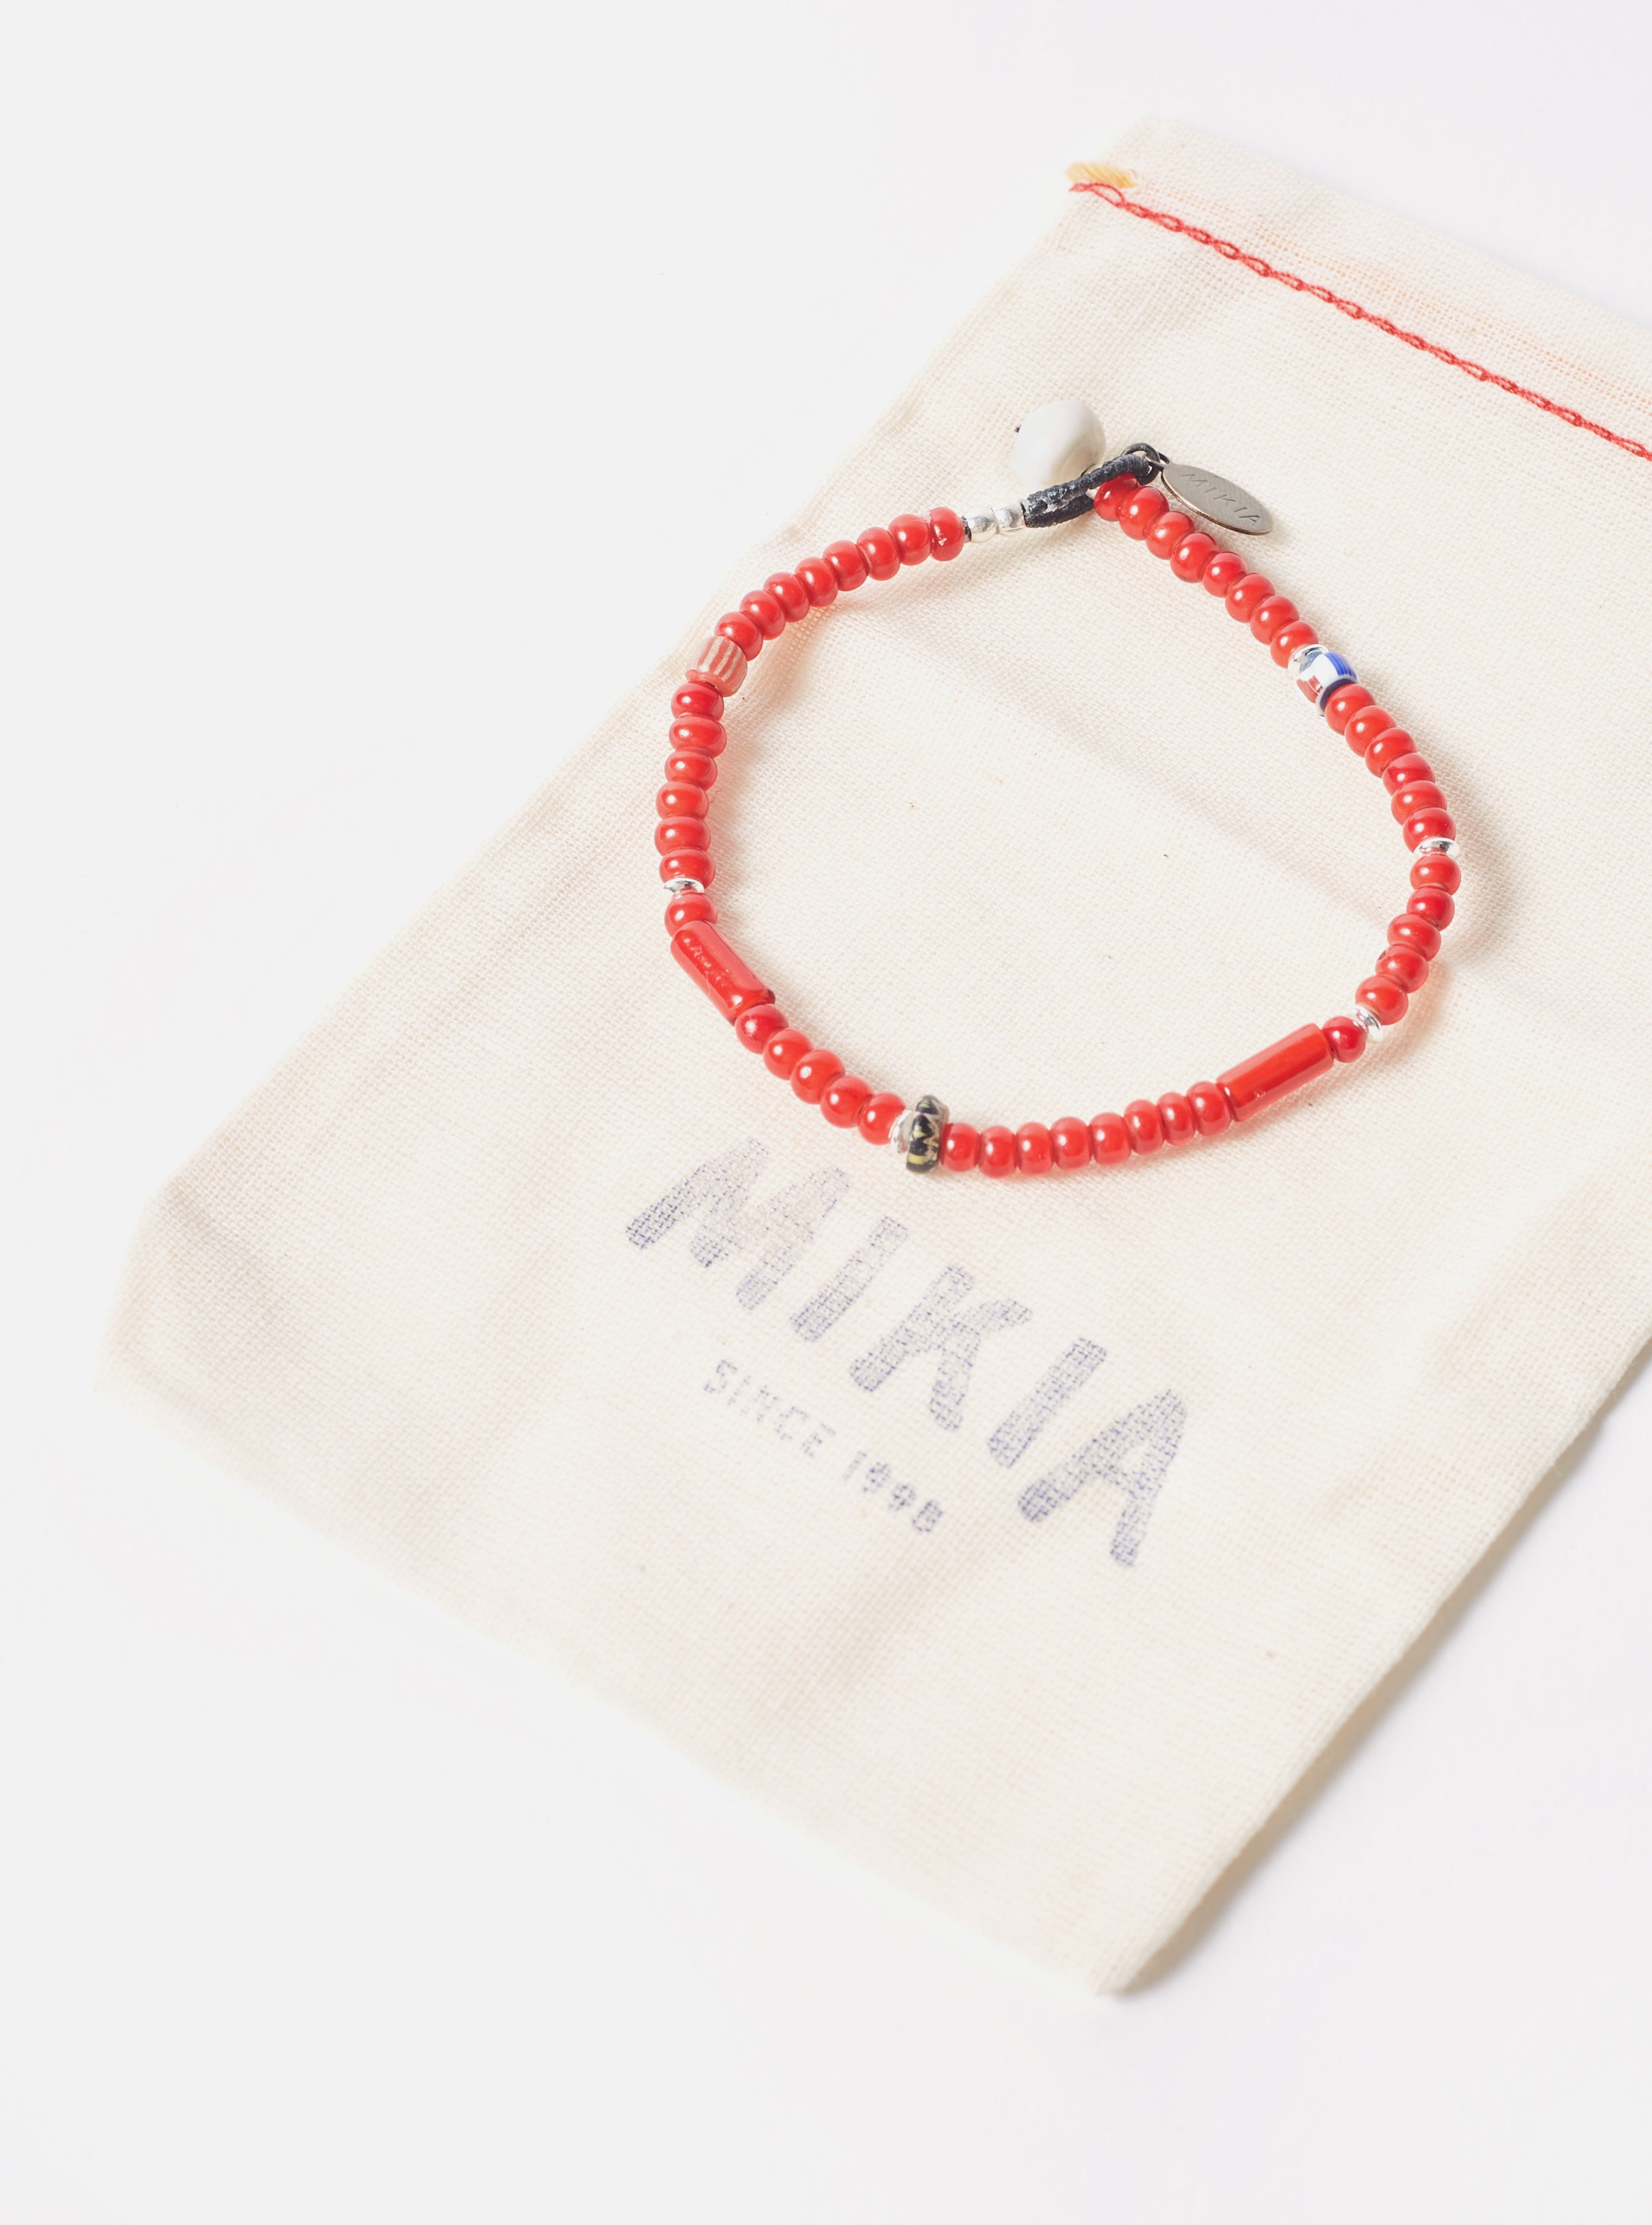 Mikia Bracelet in Red & White Hearts